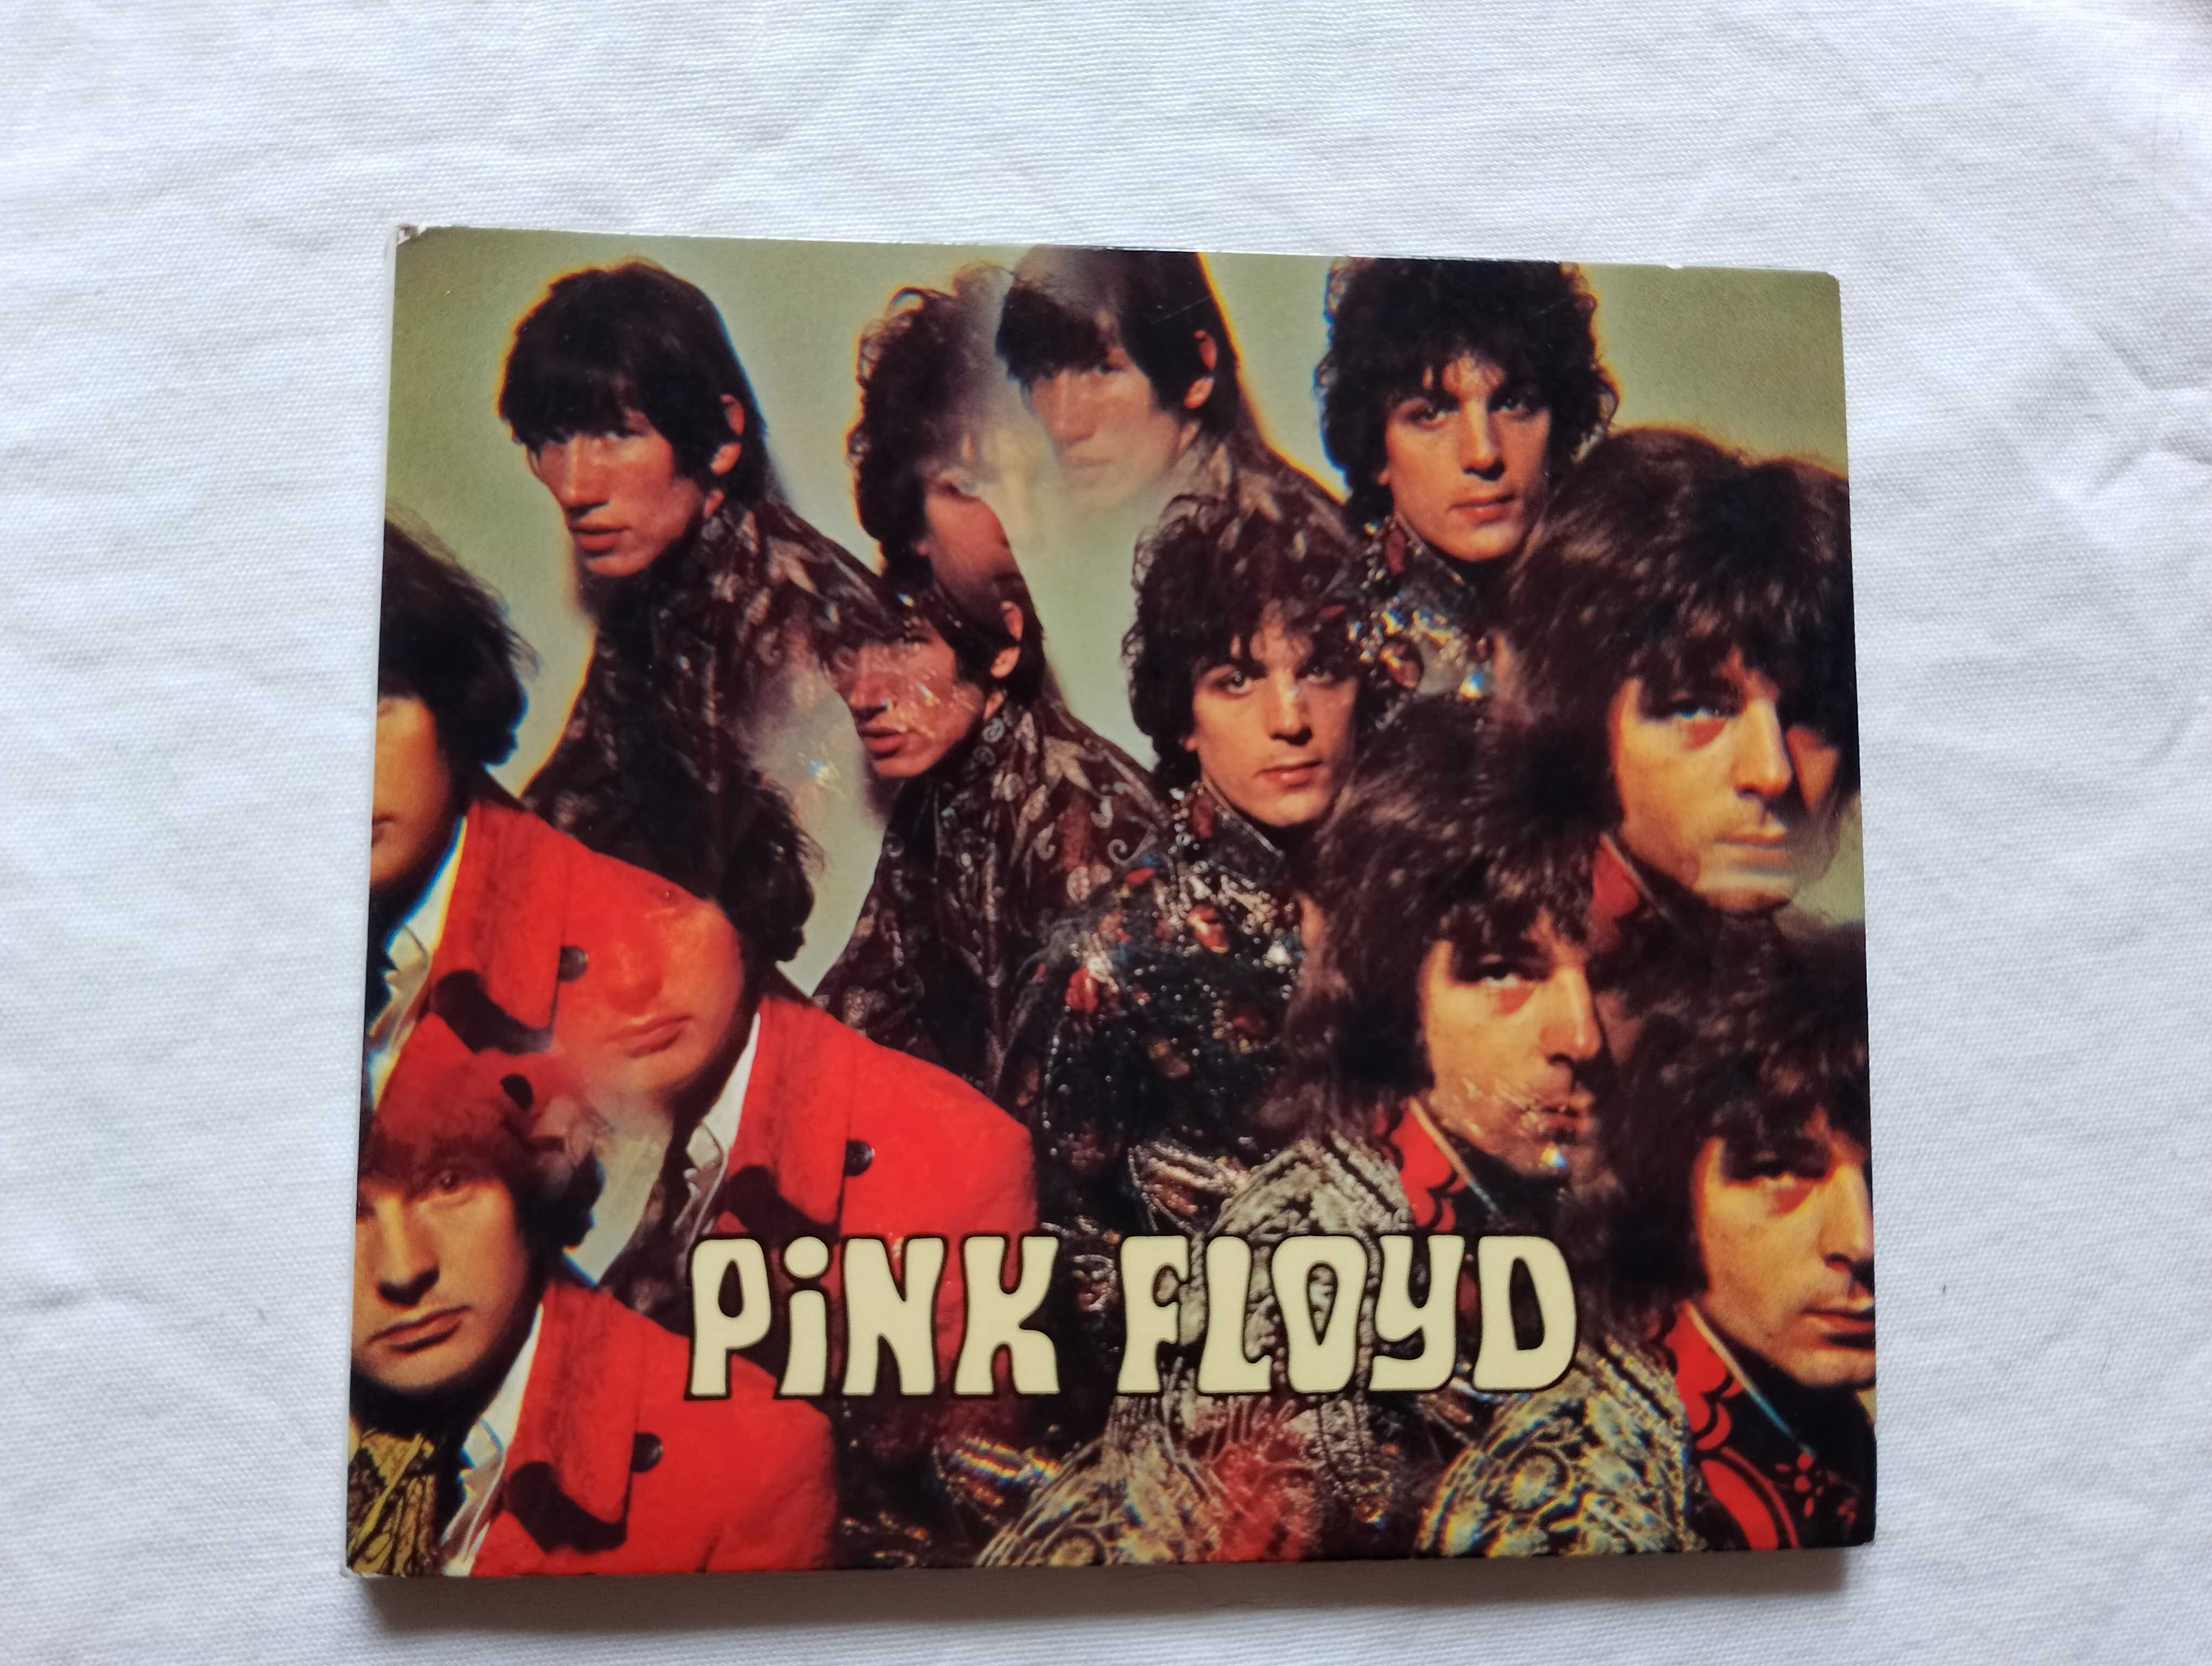 Pink Floyd - The Piper at the Gates of Dawn CD